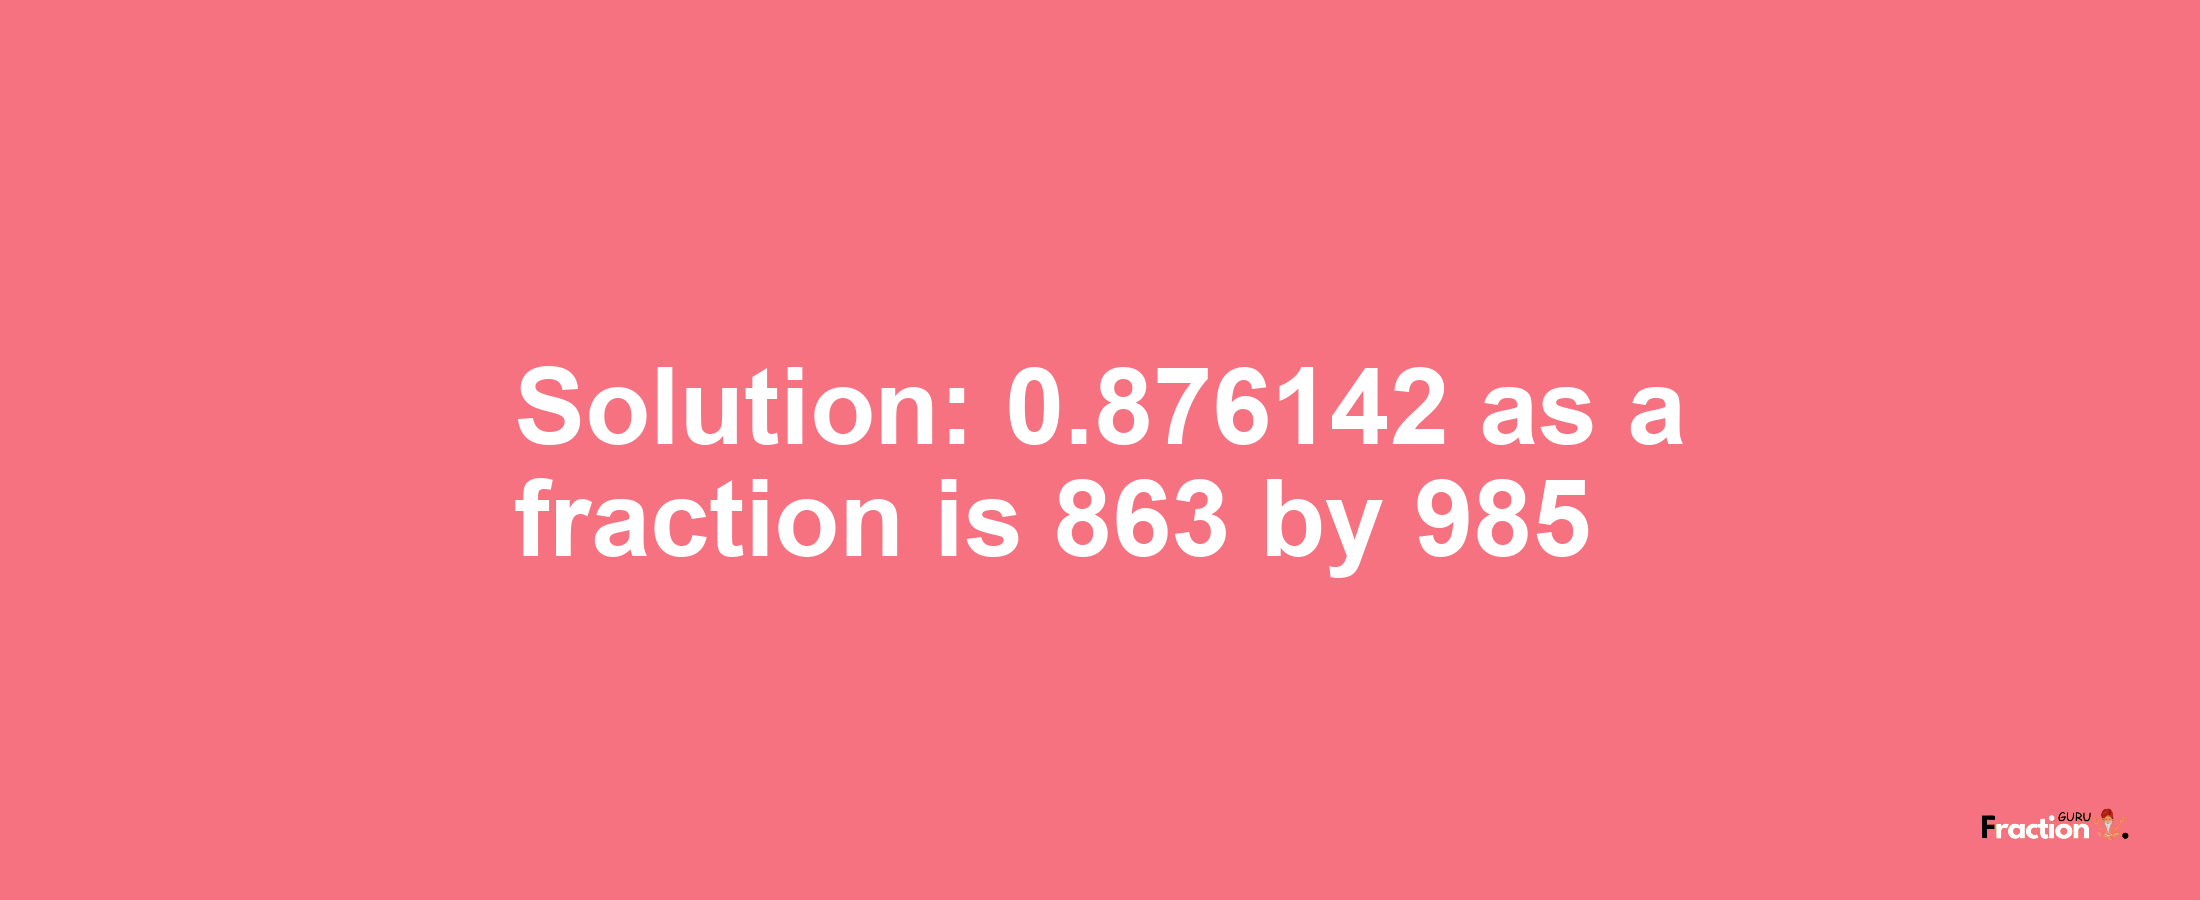 Solution:0.876142 as a fraction is 863/985